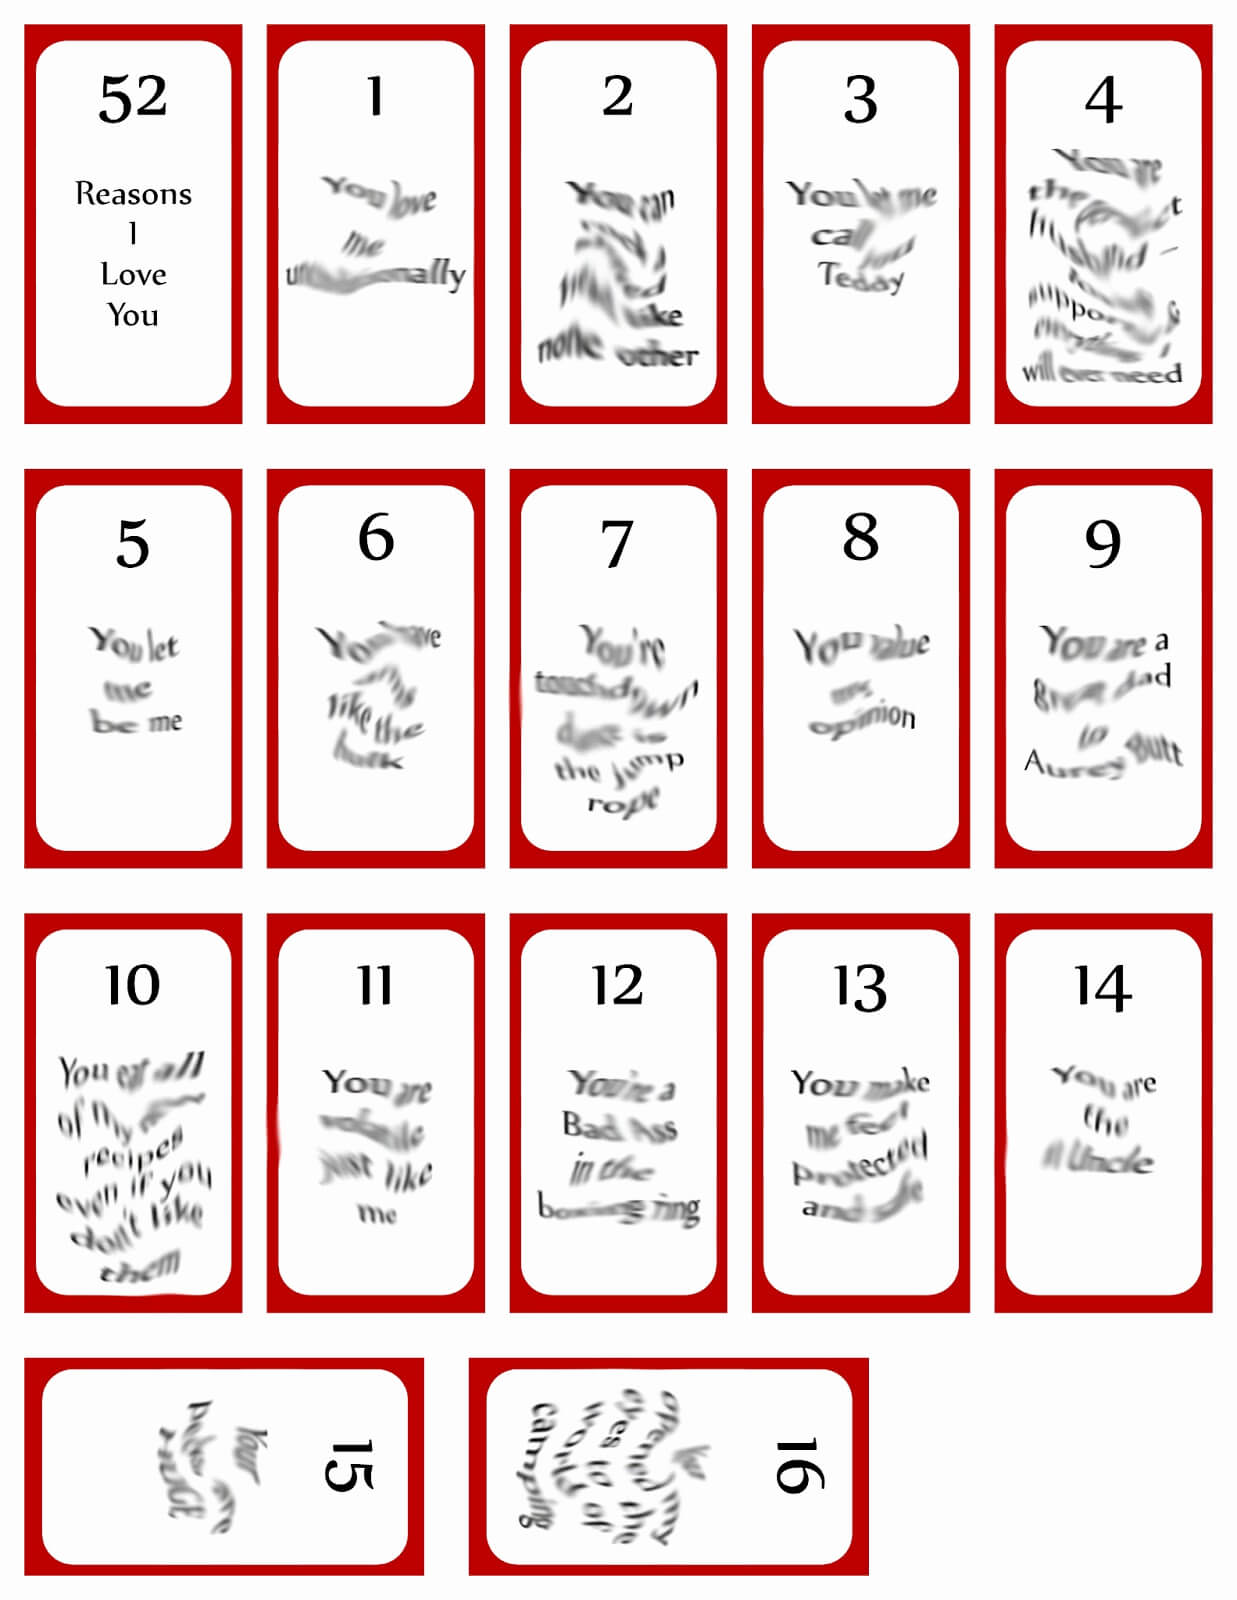 52 Reasons Why I Love You Cards Printable Templates Free Throughout 52 Reasons Why I Love You Cards Templates